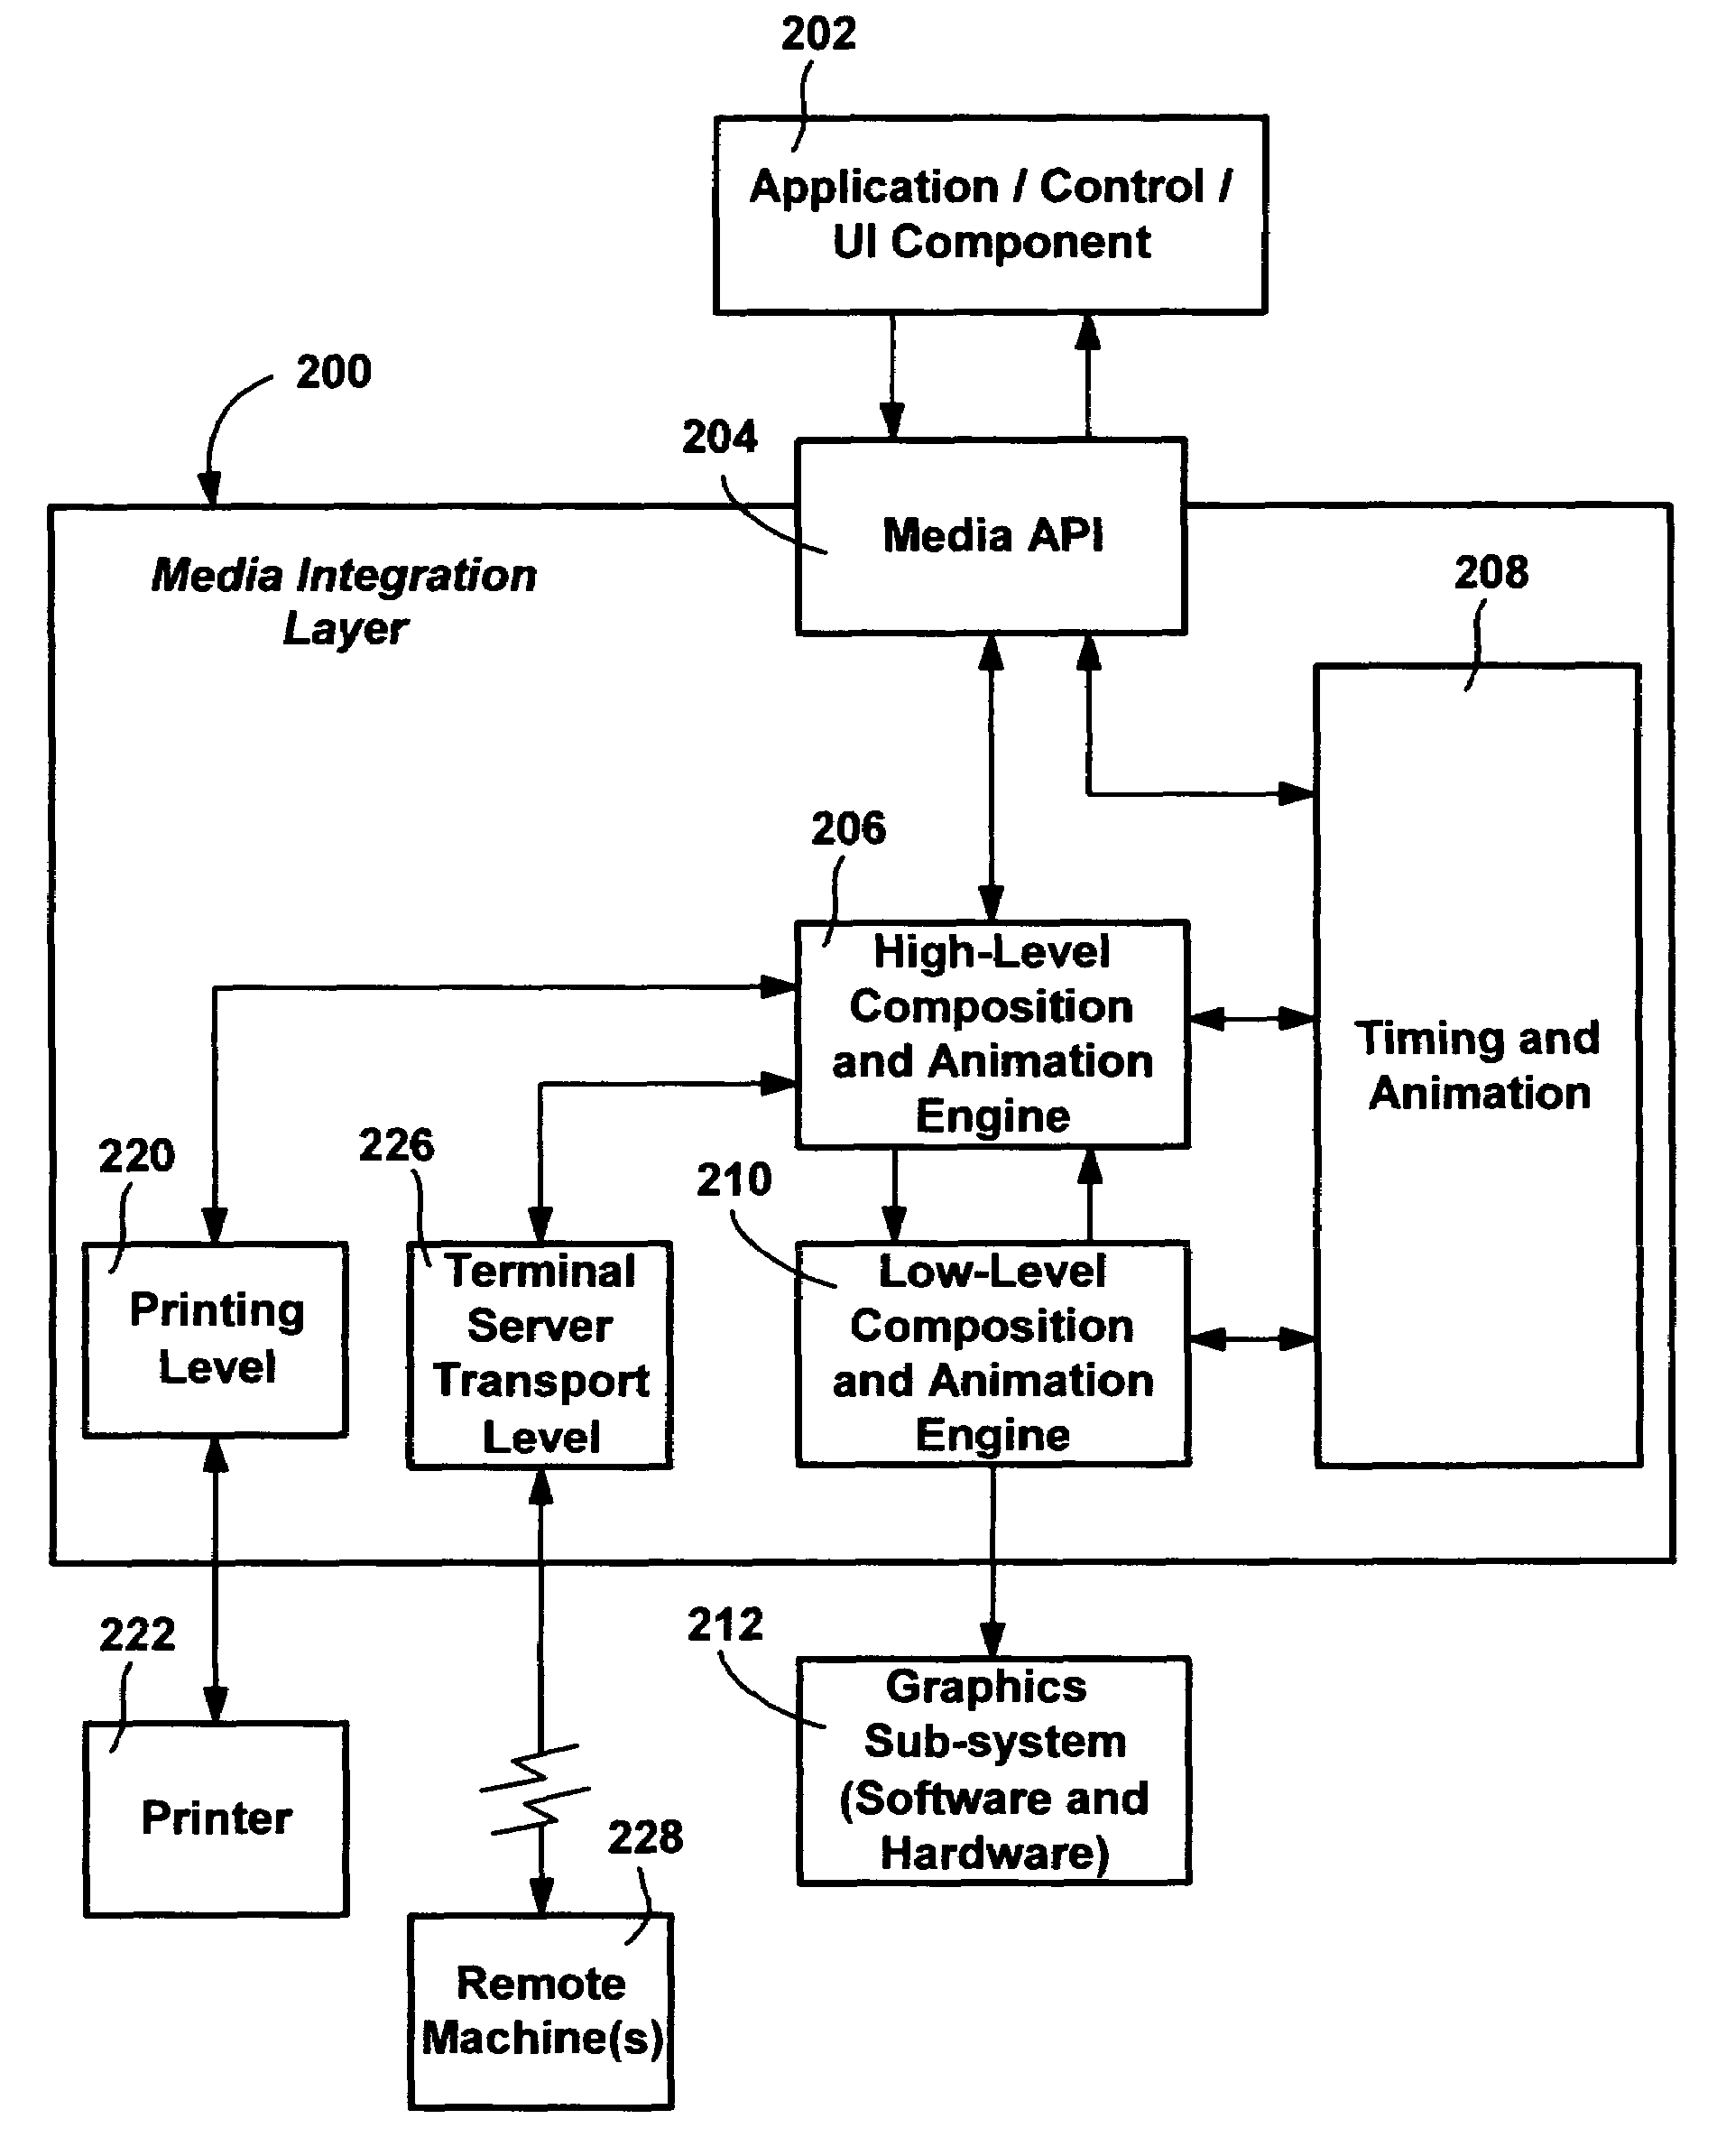 Multiple-level graphics processing with animation interval generation